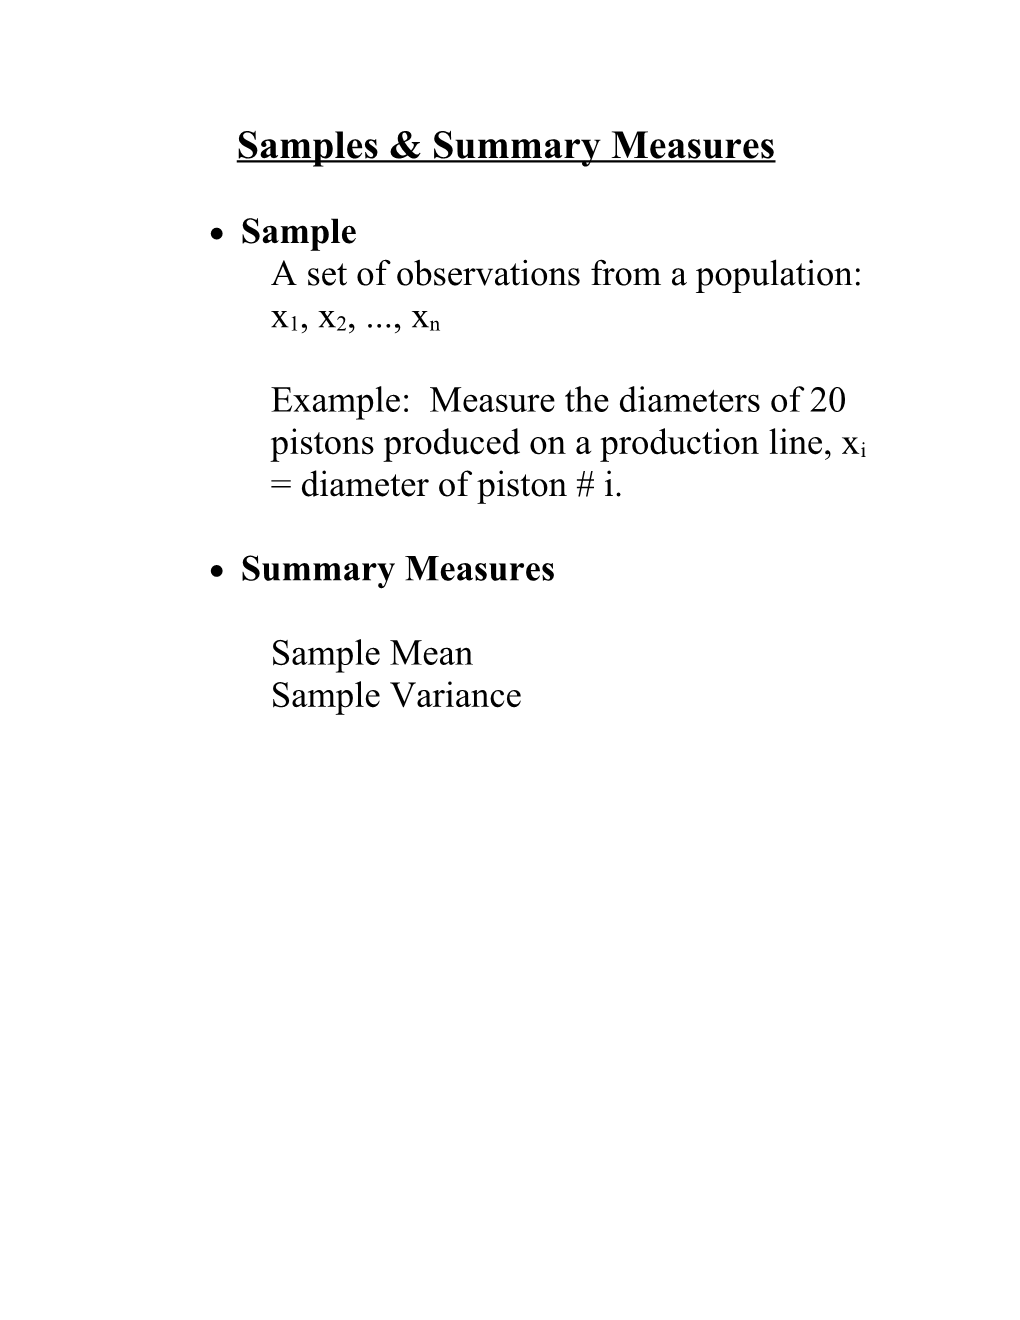 Samples & Summary Measures